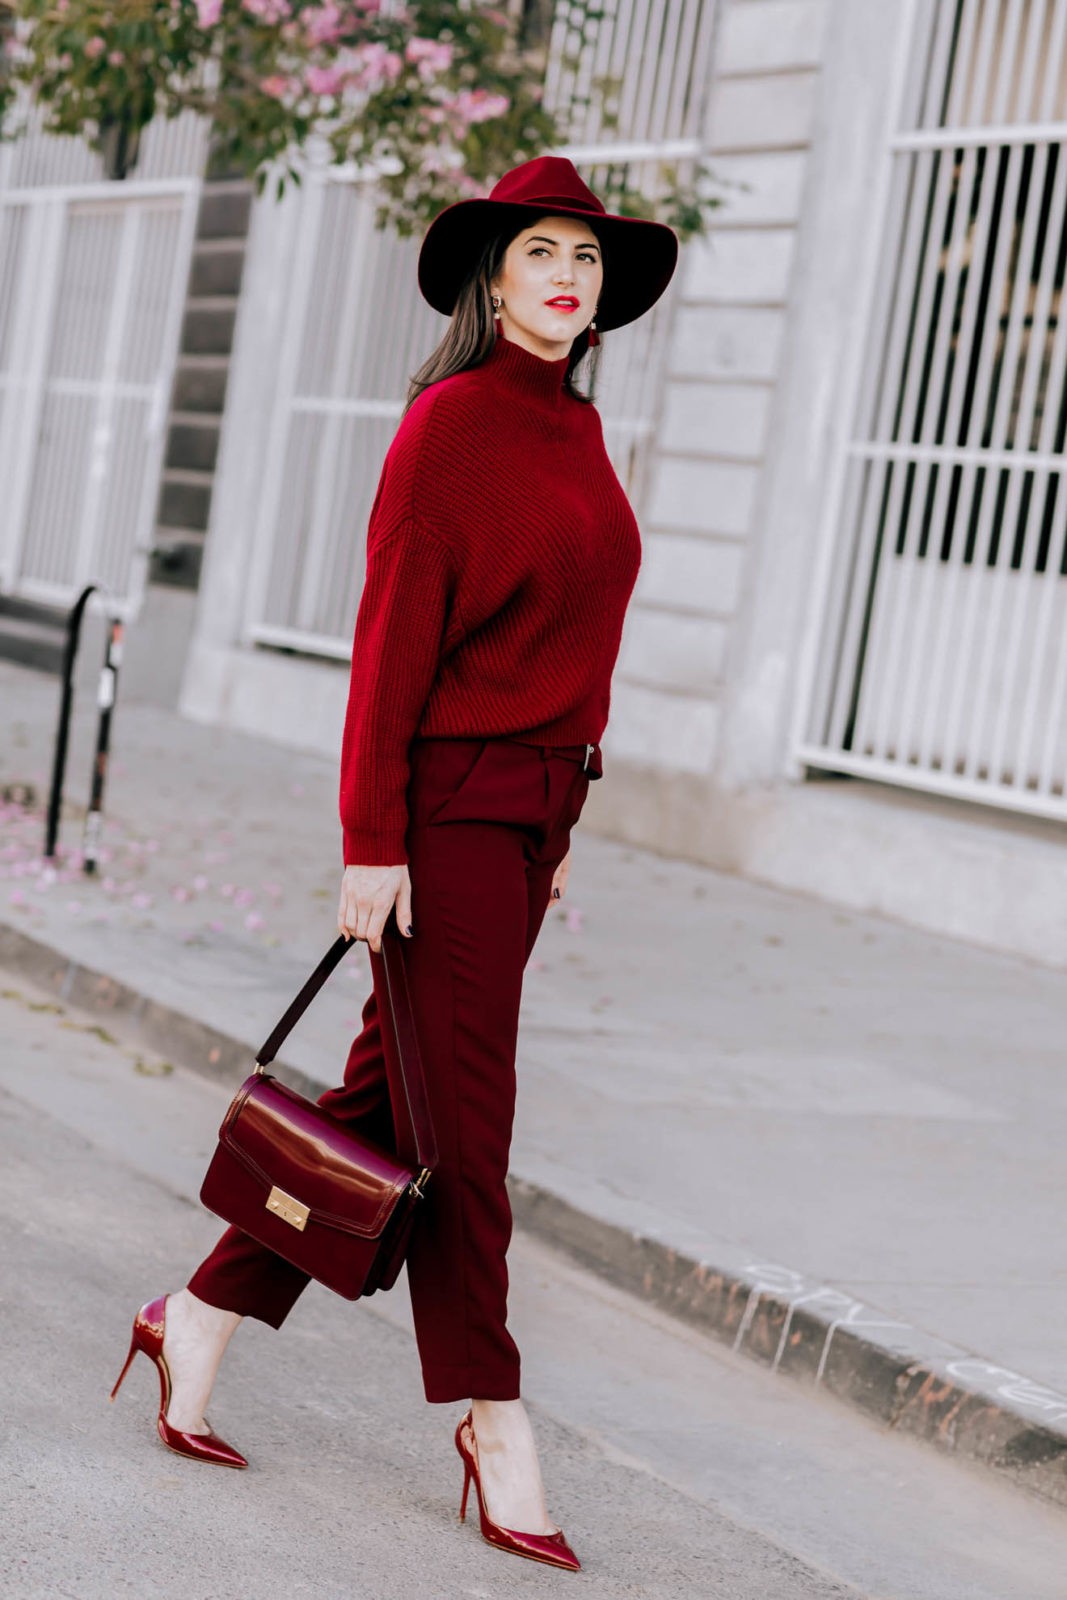 Burgundy Outfit by Los Angeles Fashion Blogger Laura Lily,